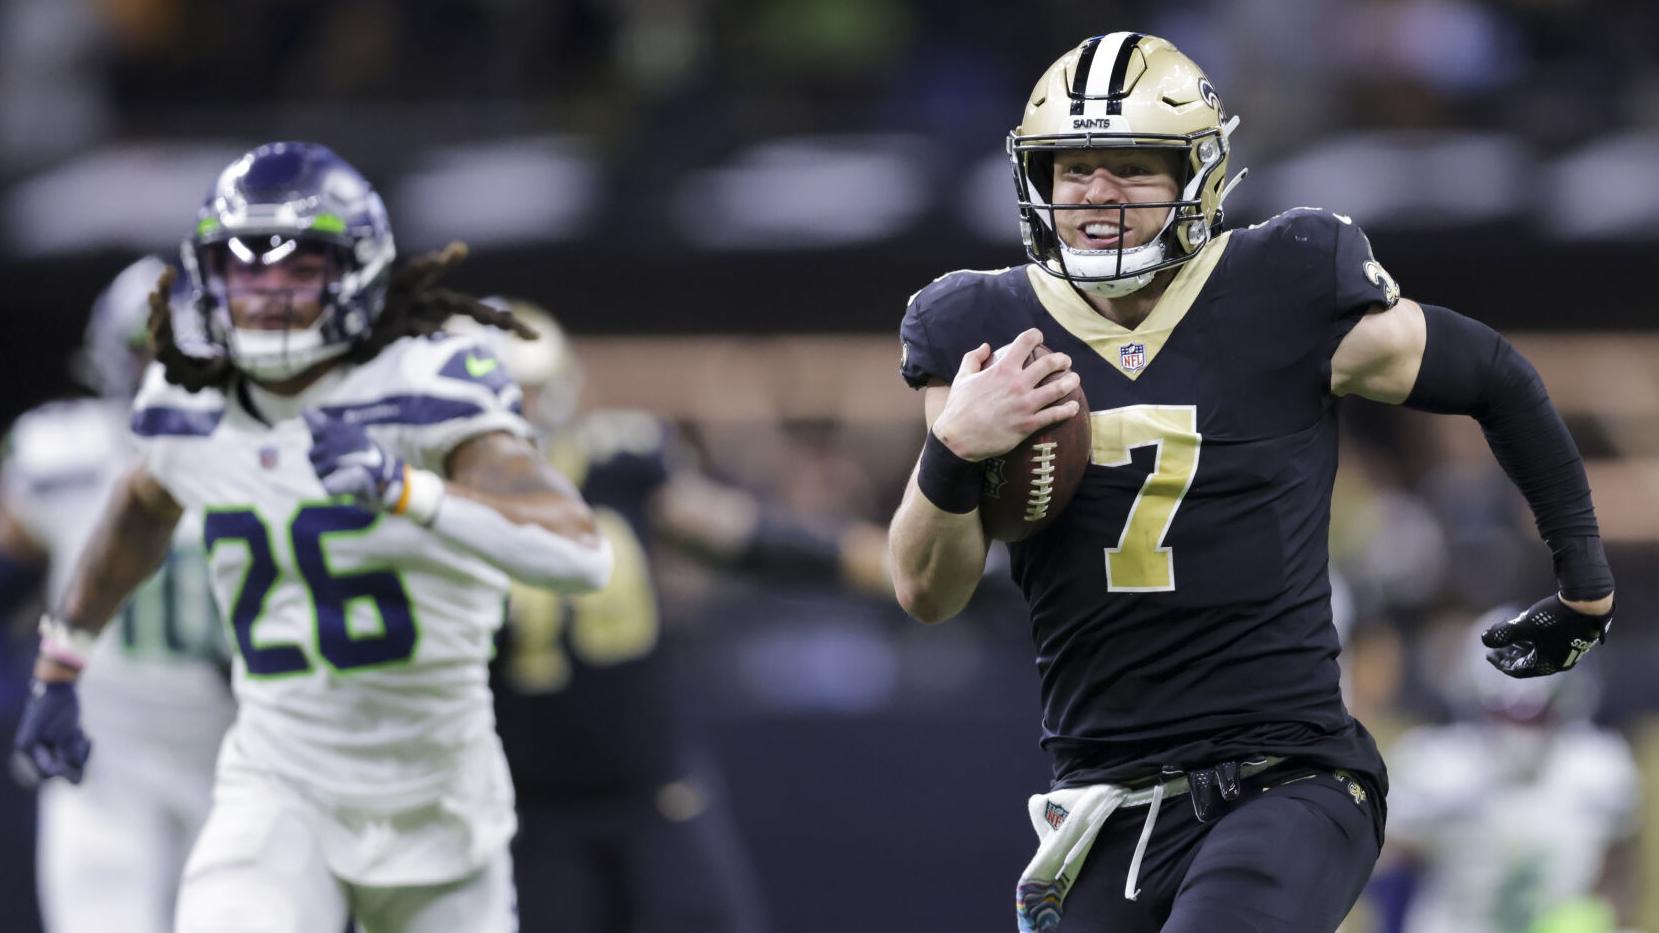 Saints weapon Taysom Hill says he doesn't consider himself a tight end